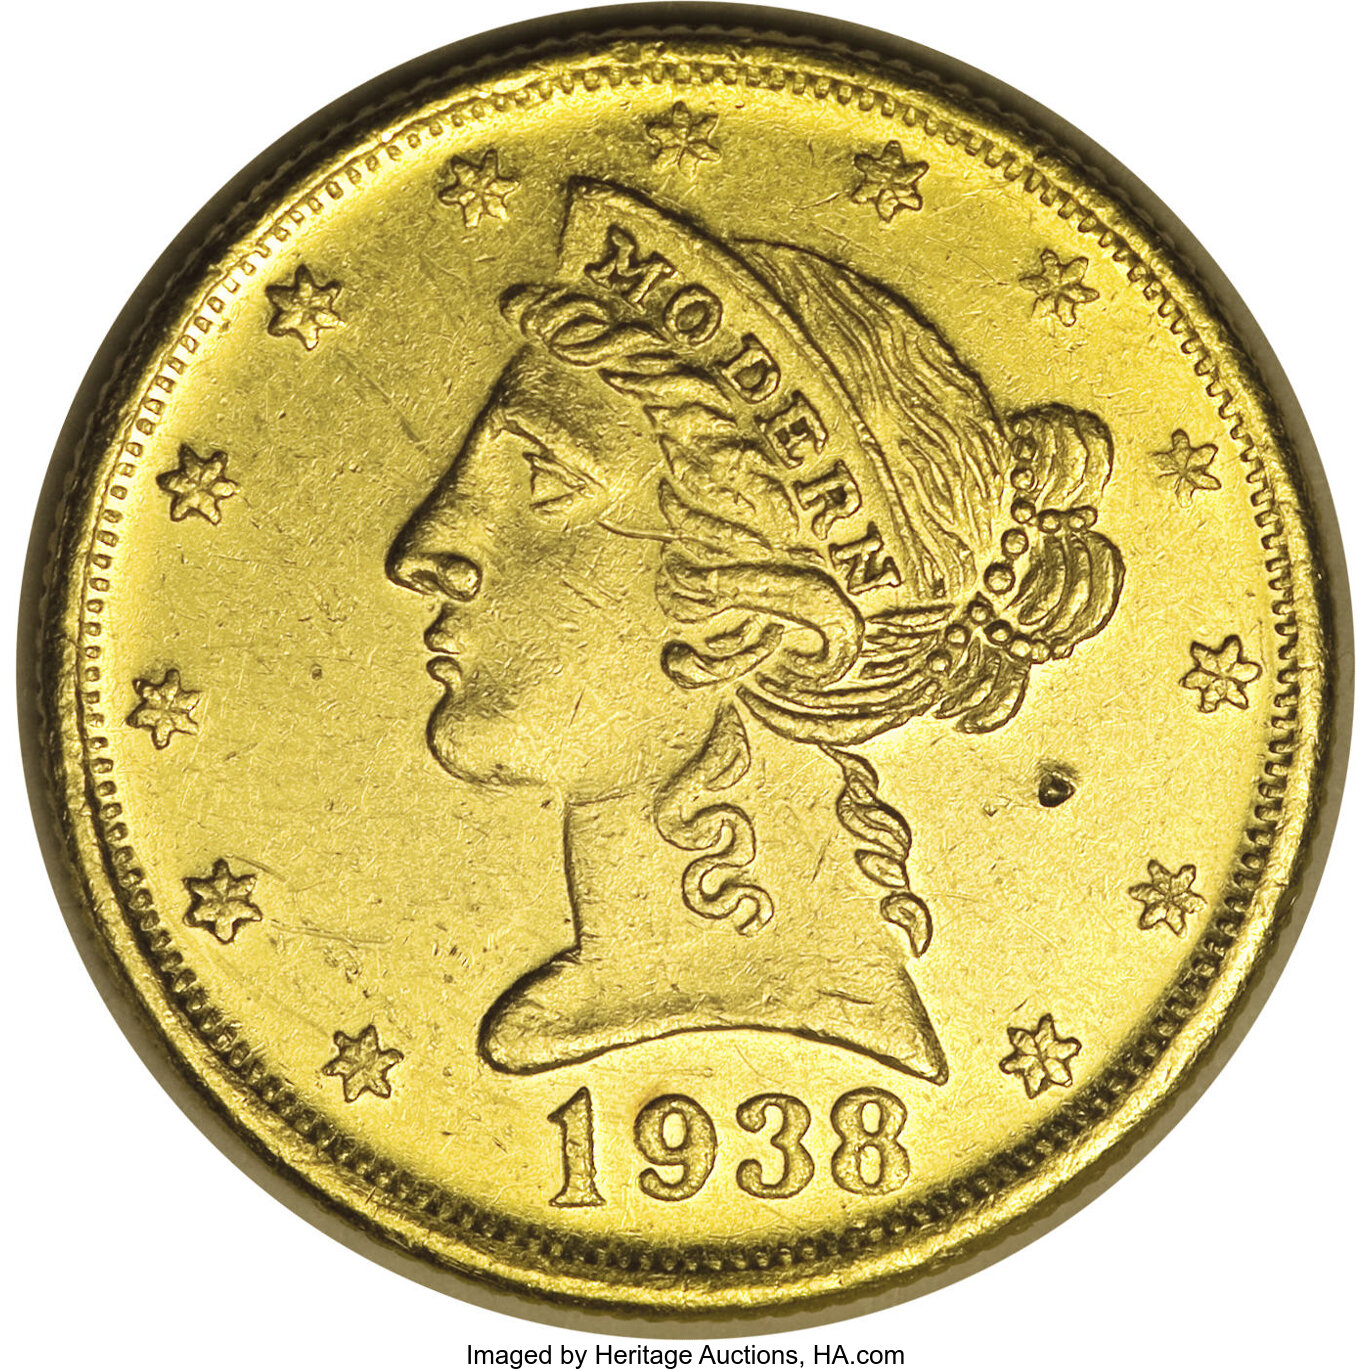 1938 Modern Jewelry Co. A privately produced gold token that appears